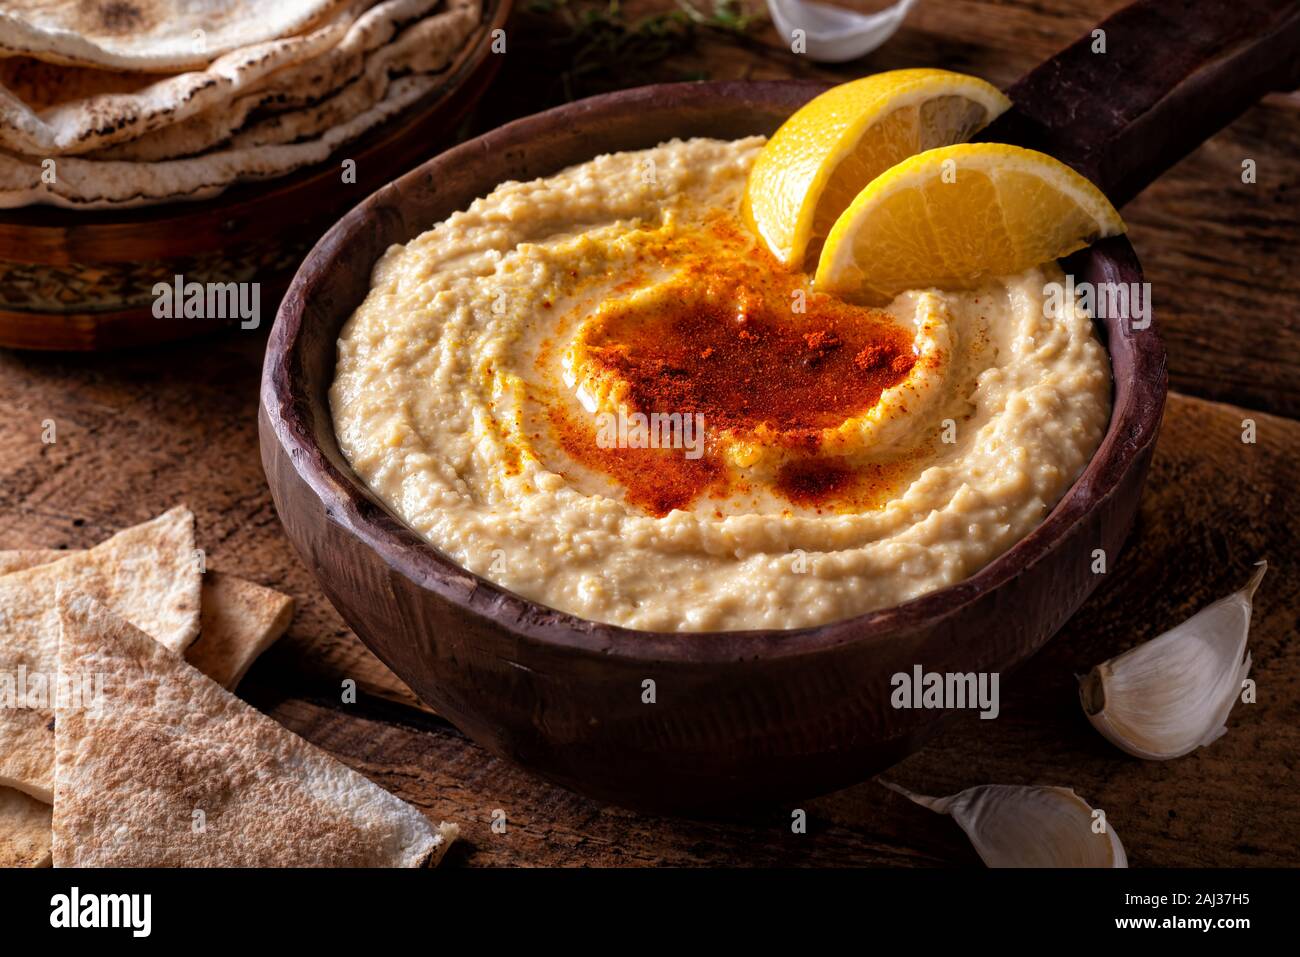 A bowl of creamy delicious middle eastern style hummus with lemon garnish. Stock Photo